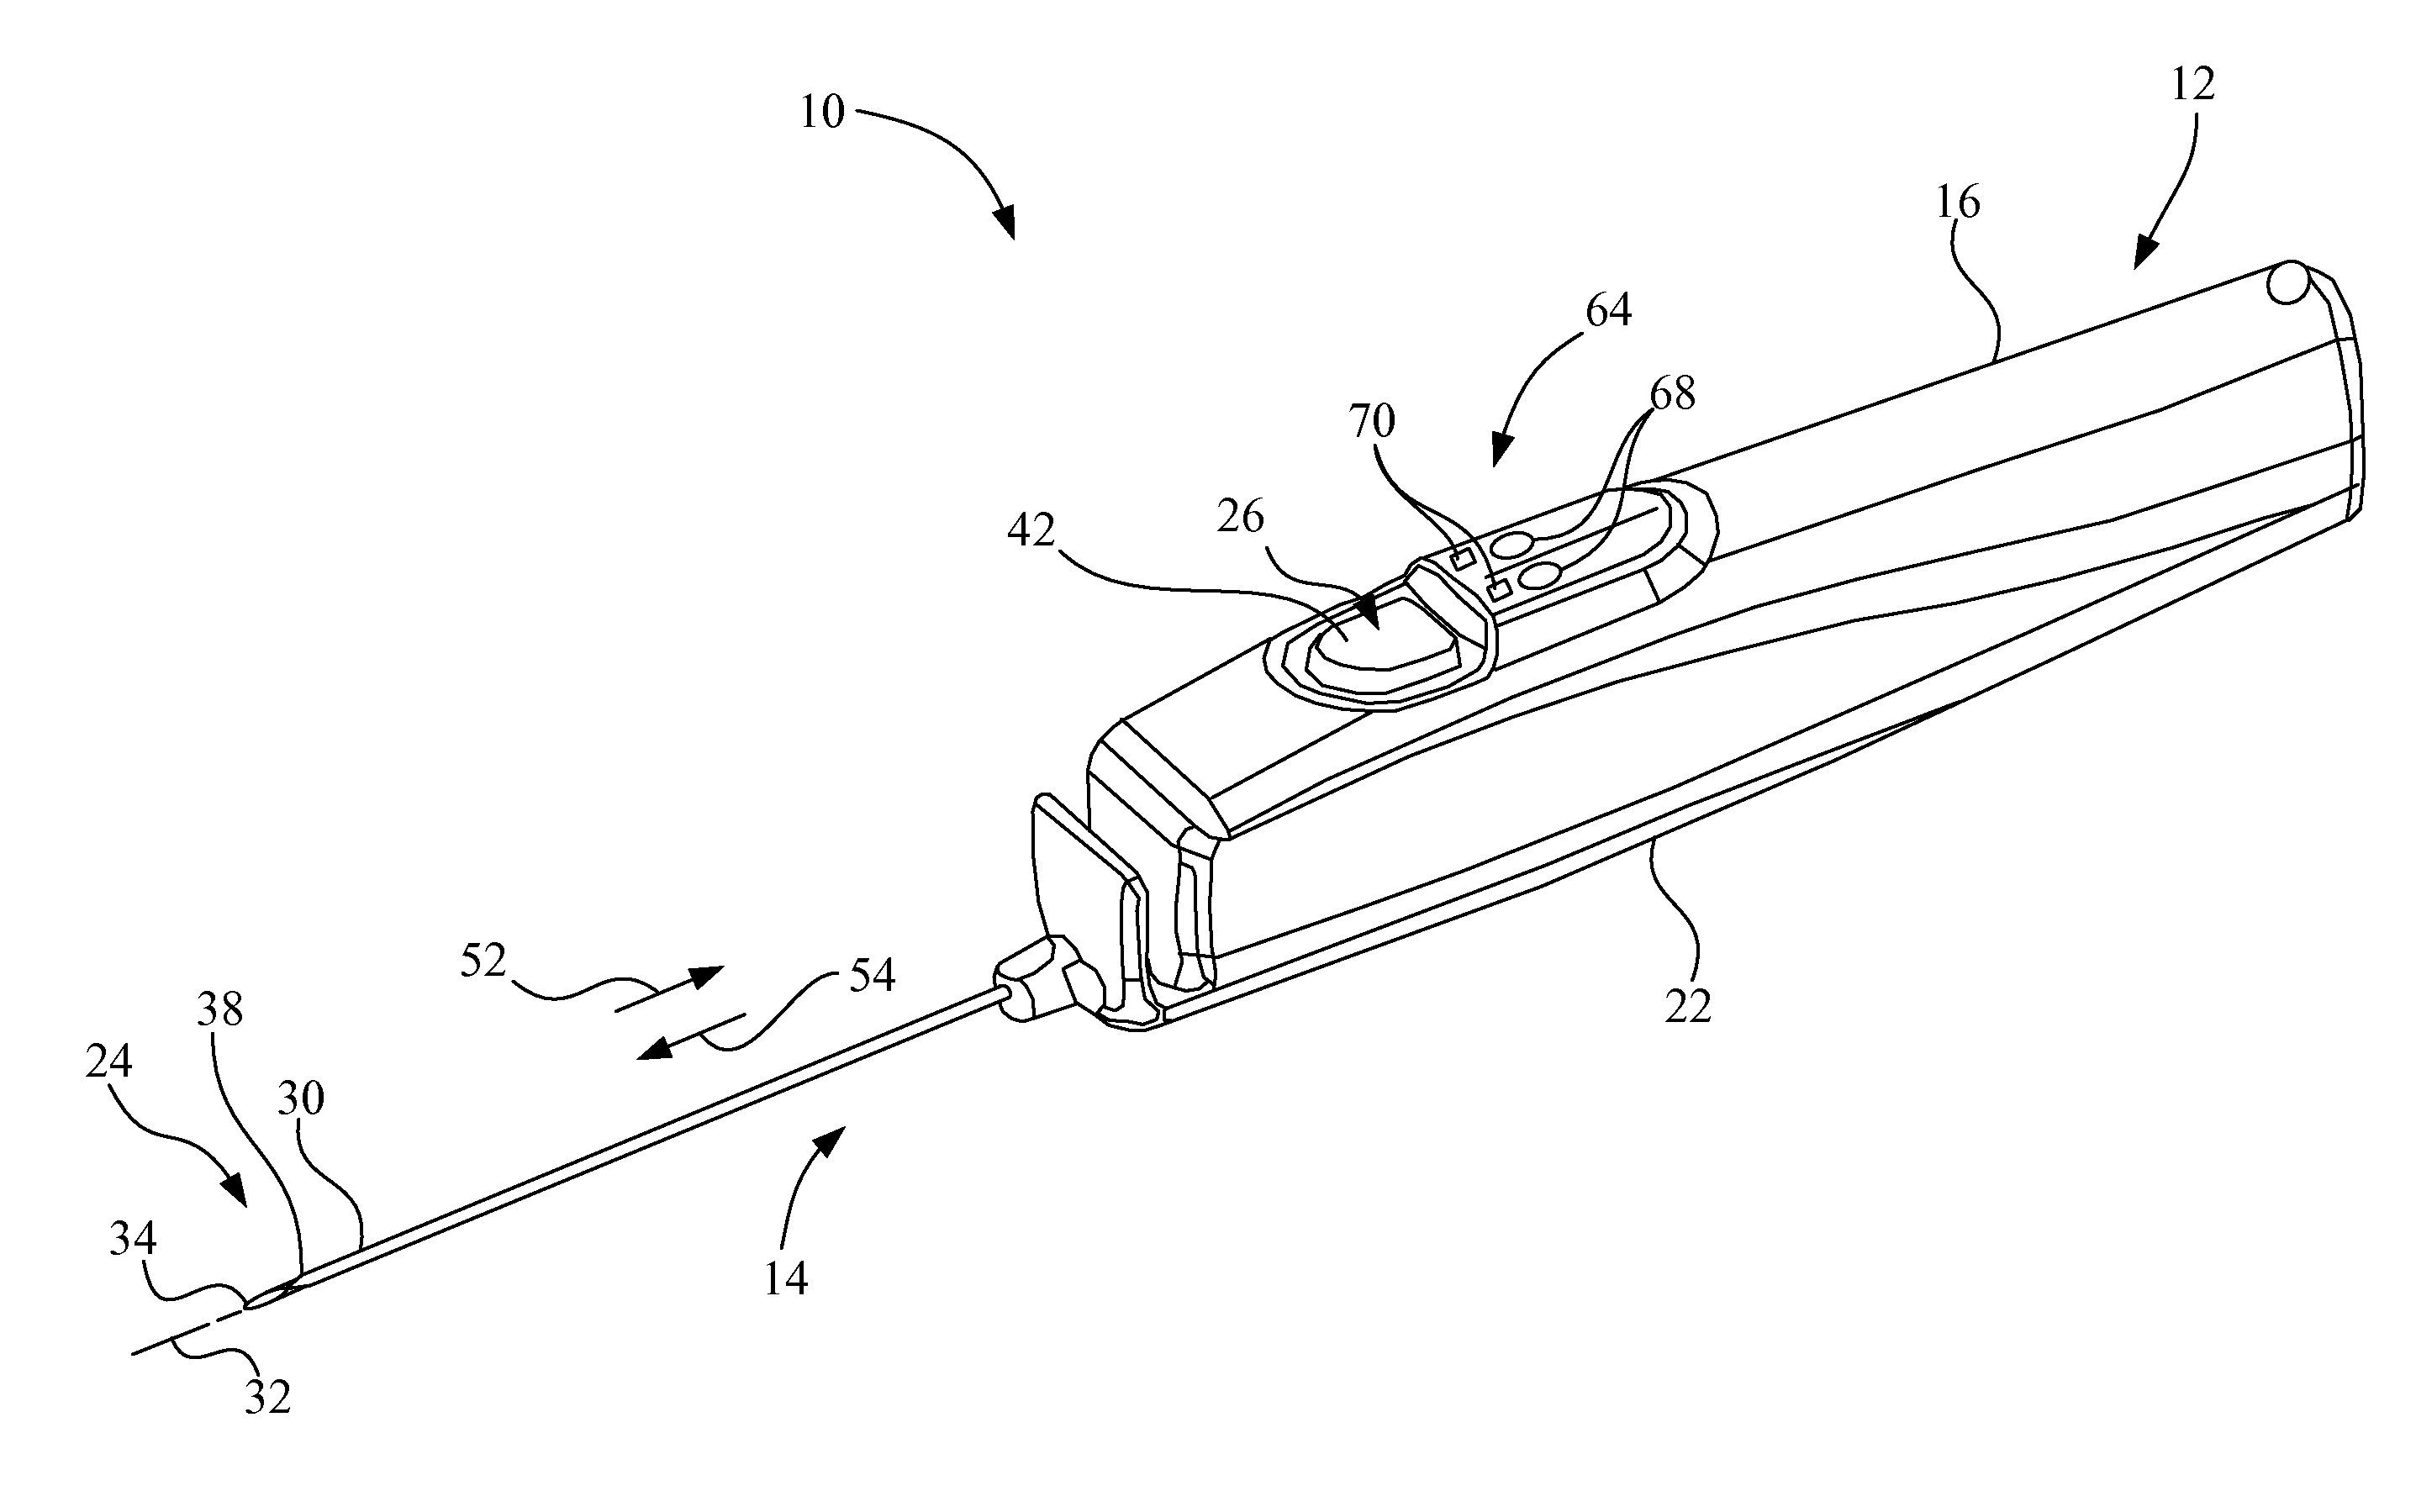 Biopsy system with infrared communications